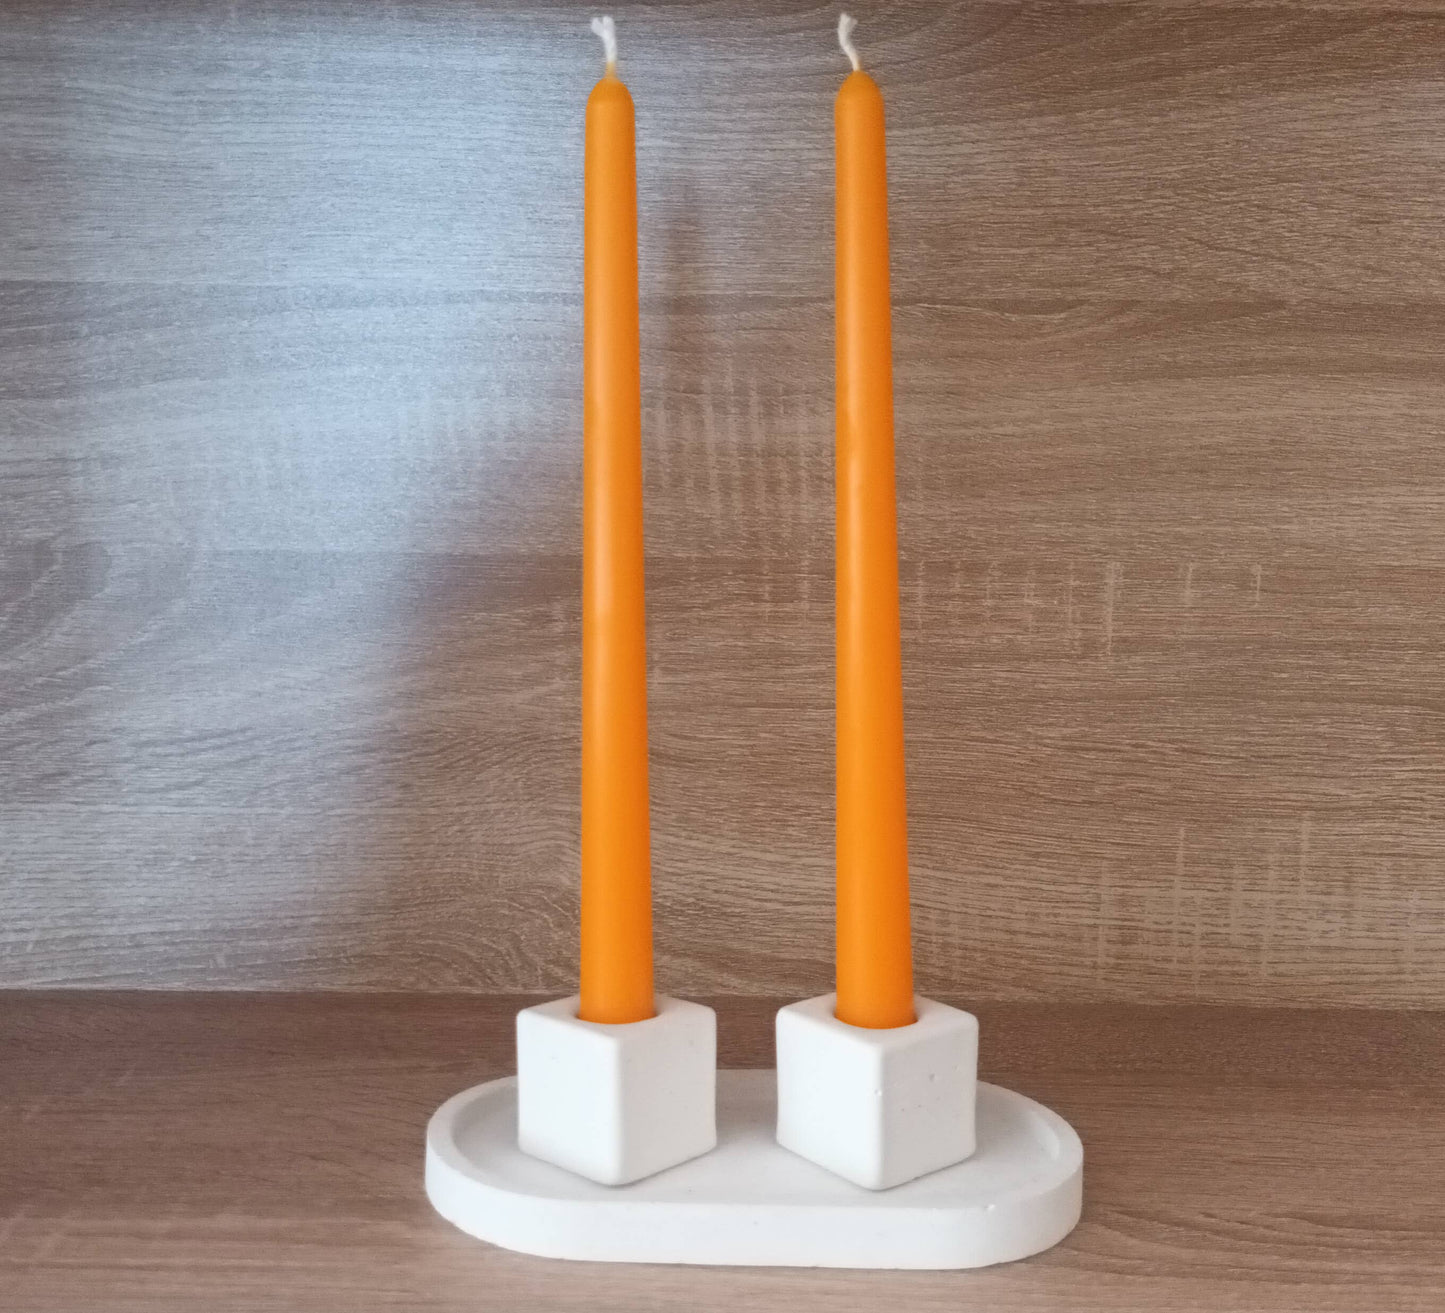 Beeswax Taper Candle - Make your color mix